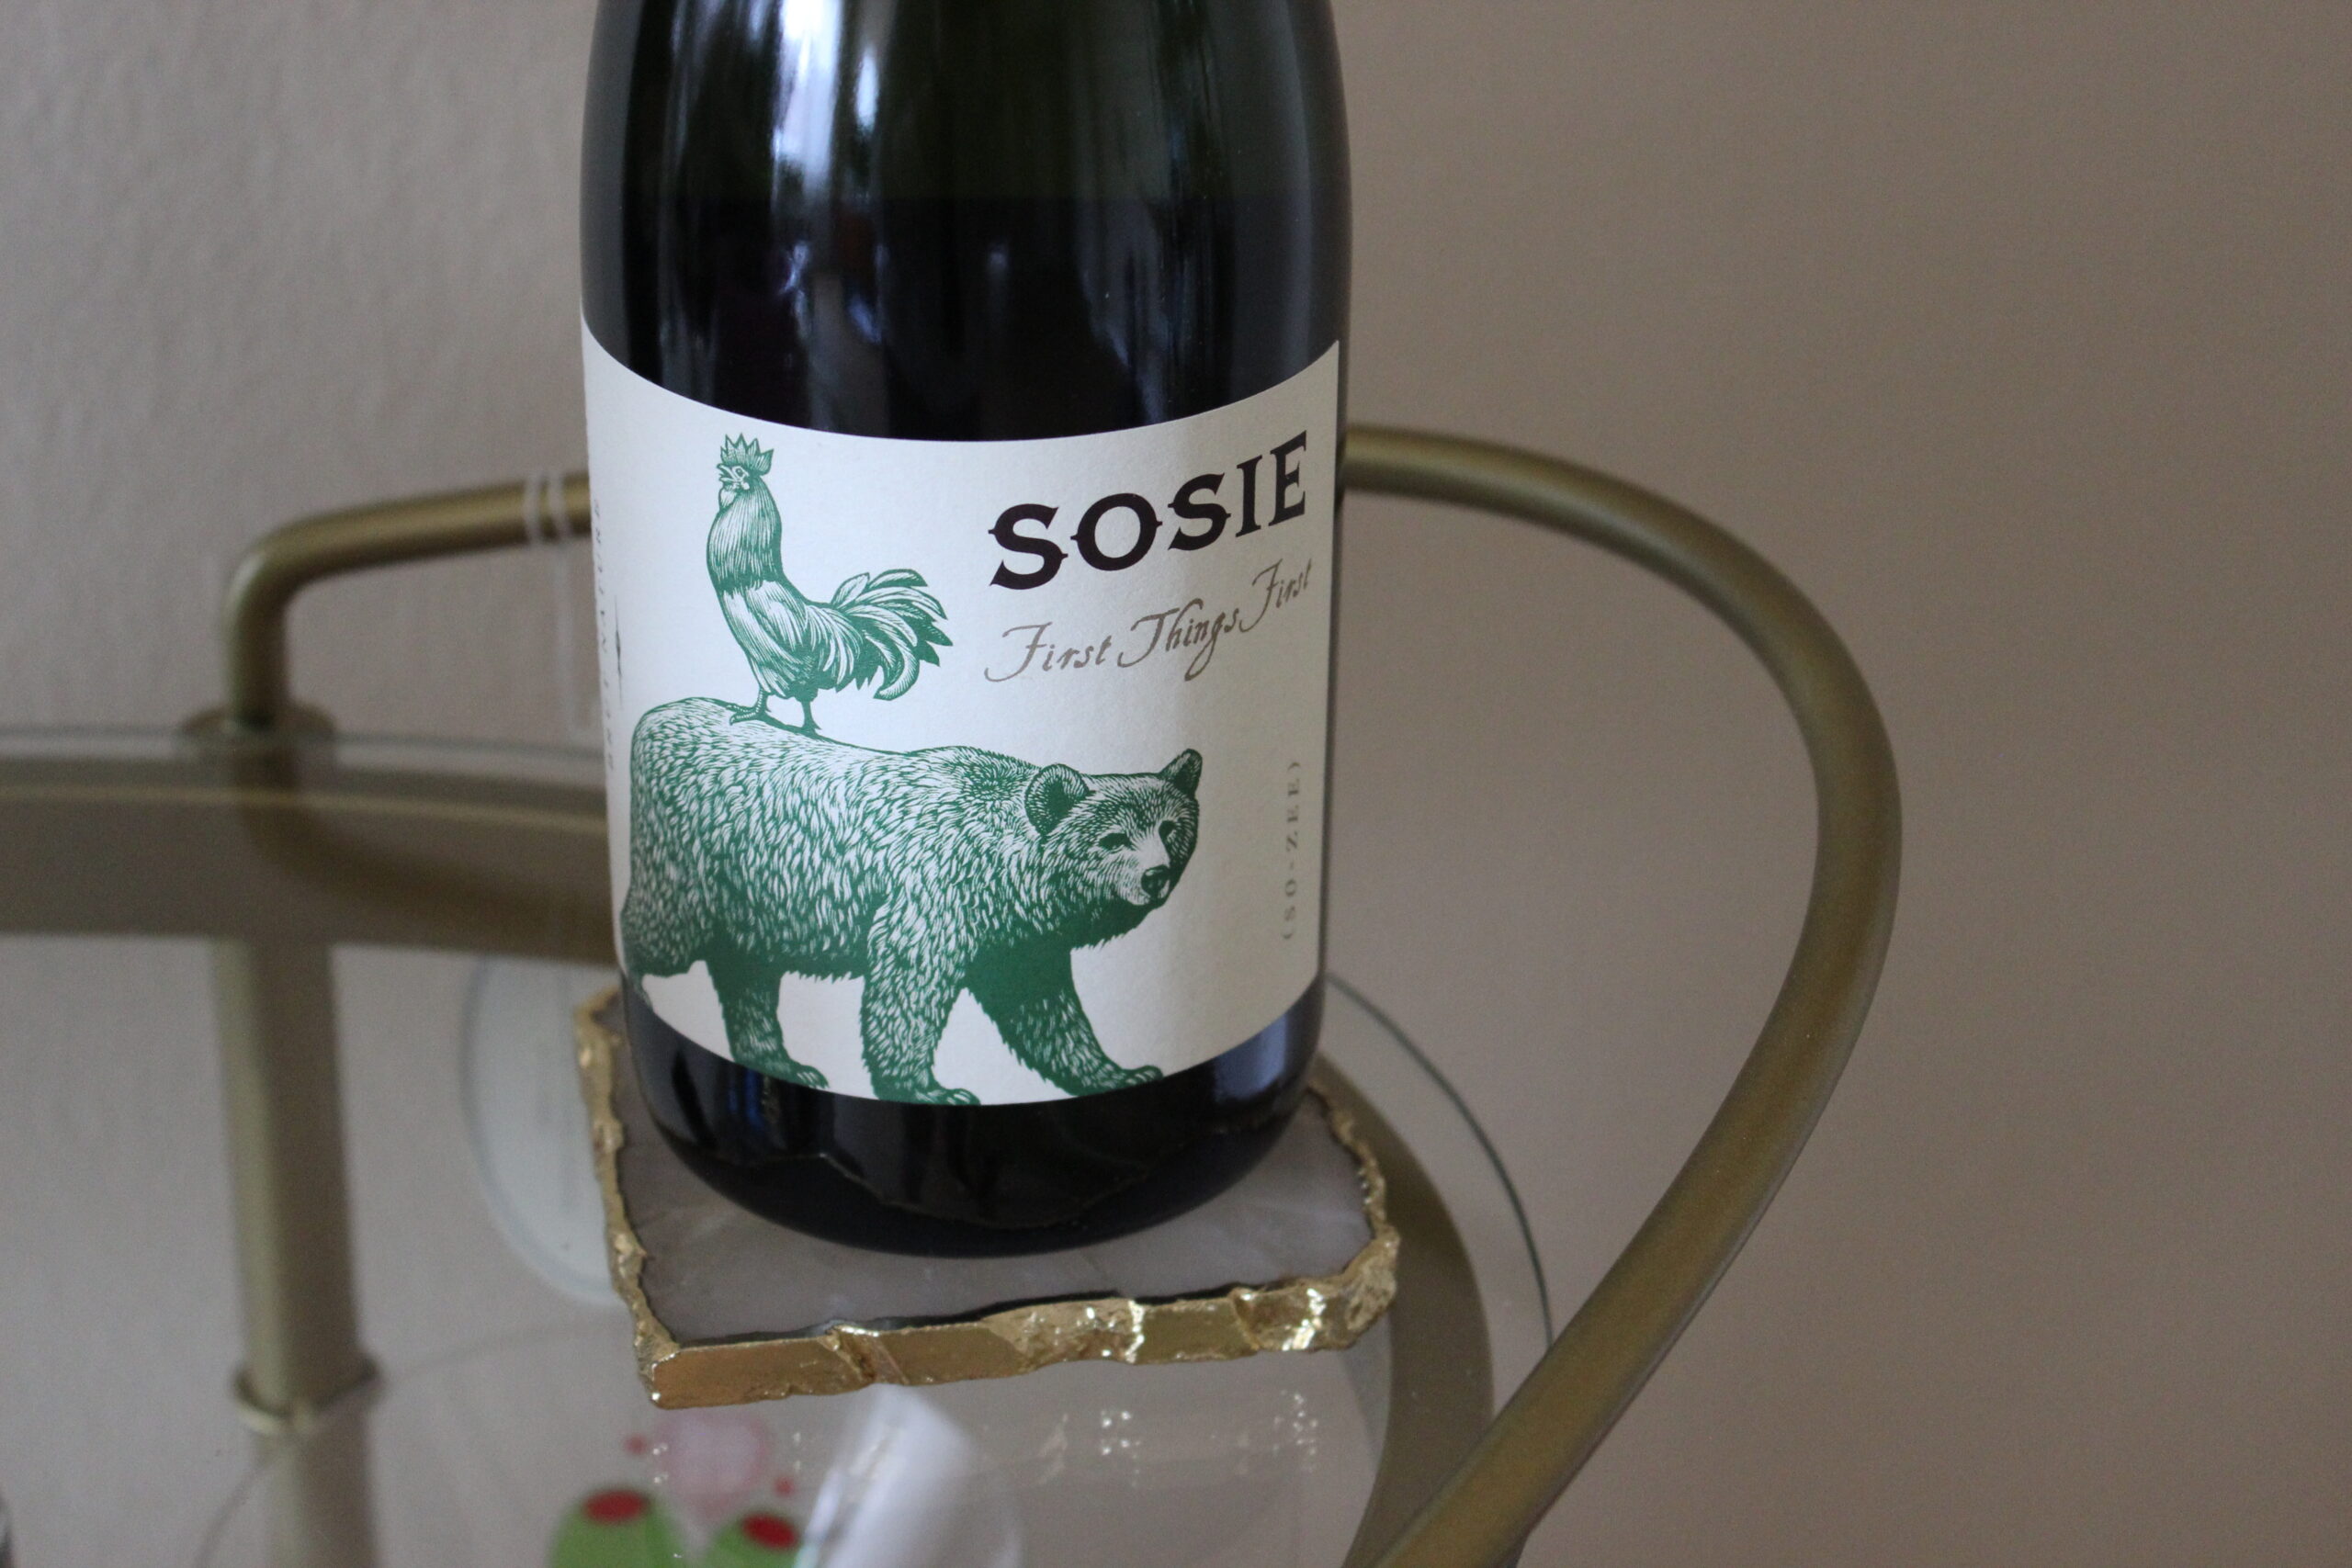 Sosie Wines First Things First